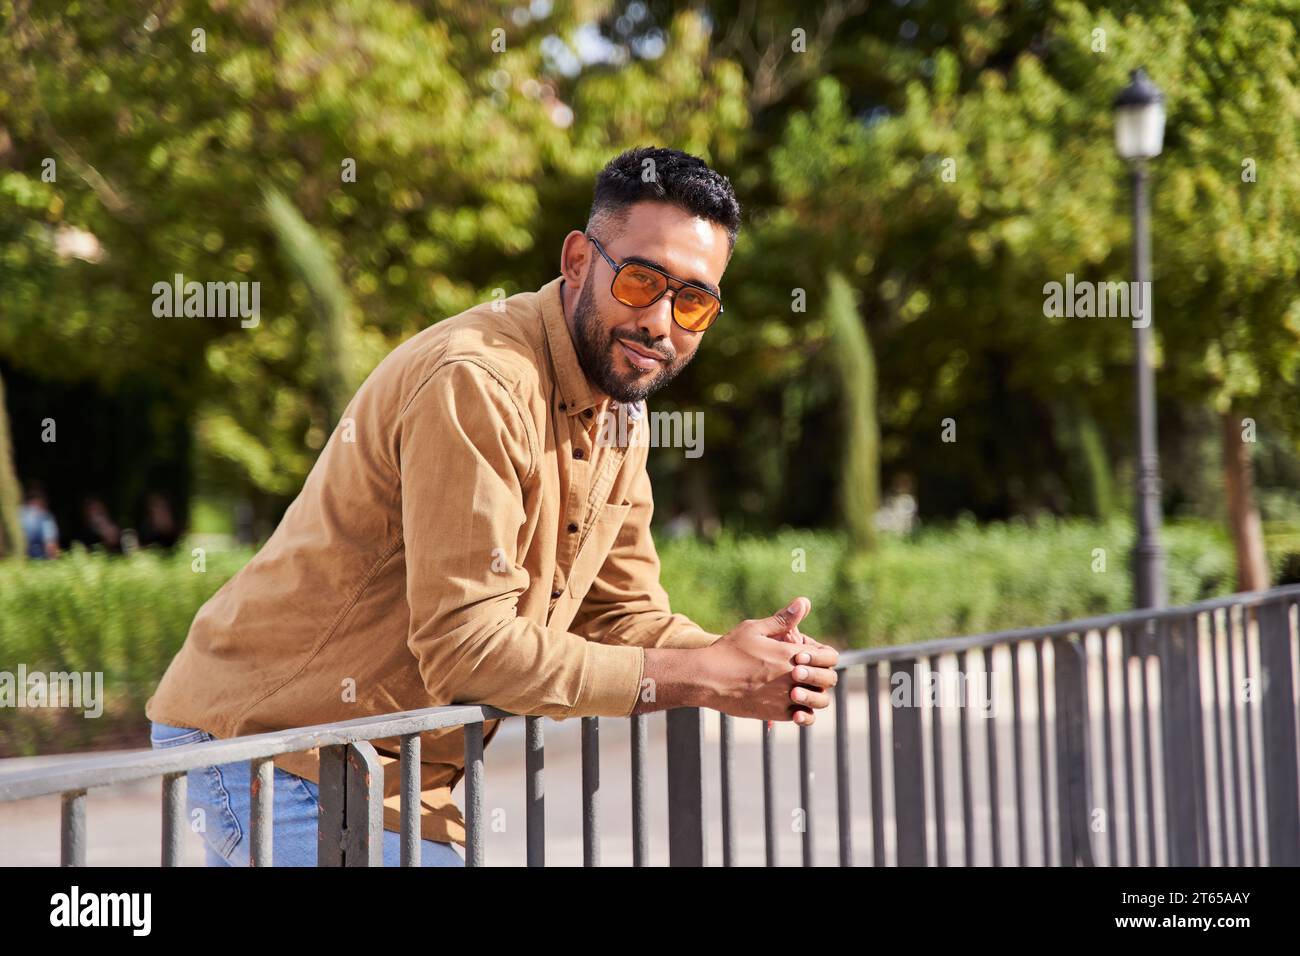 latin man leaning on railing looking at camera with orange sunglasses and casual clothing Stock Photo